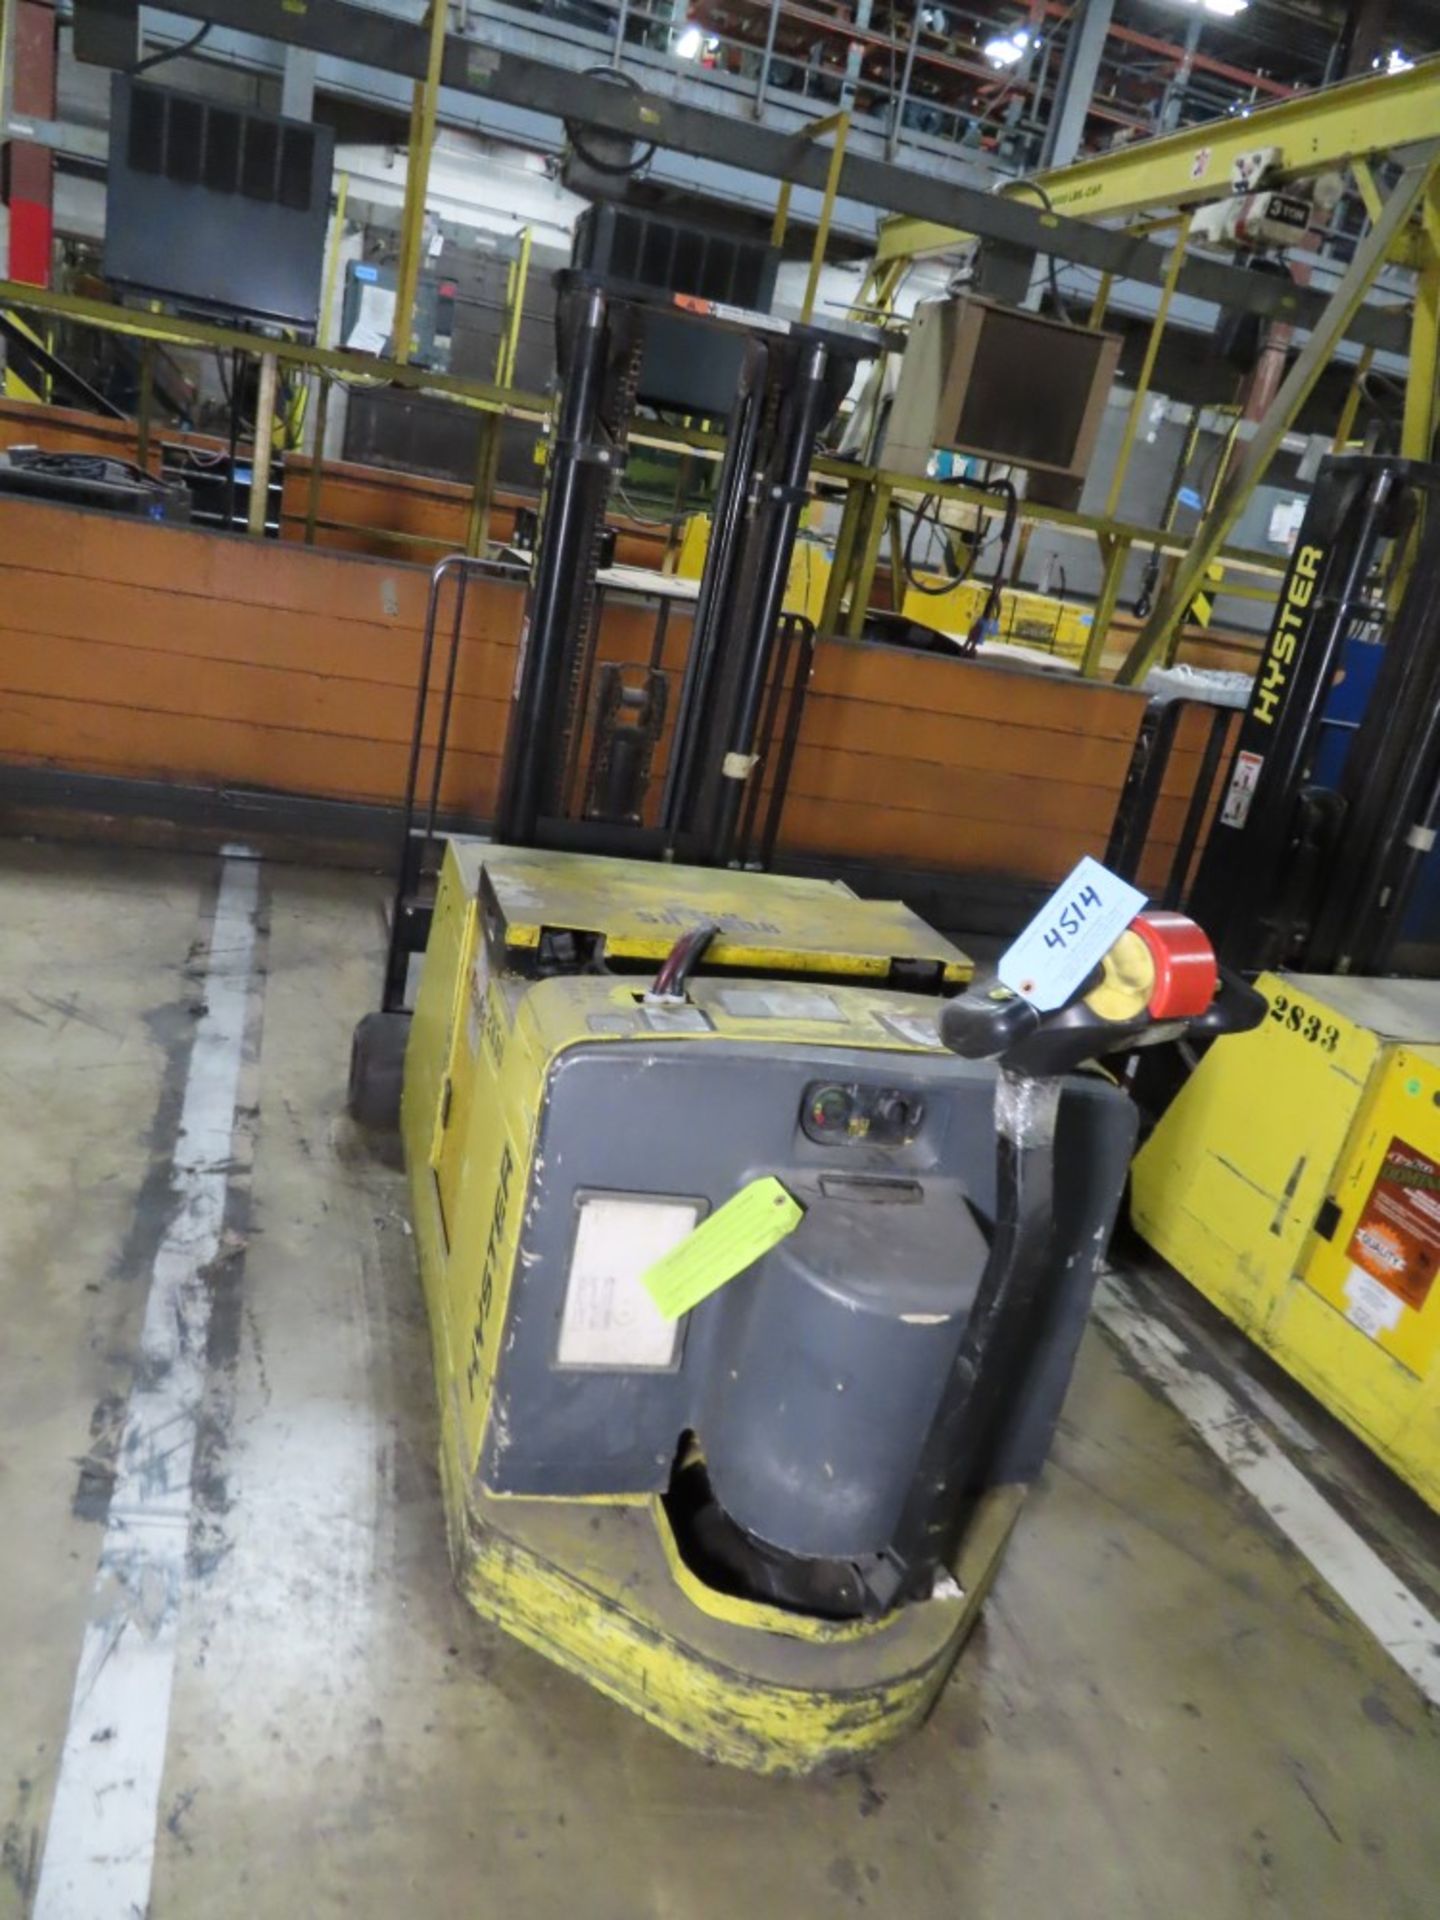 HYSTER APPROXIMATELY 4,000LB. CAPACITY ELECTRIC LIFT TRUCK